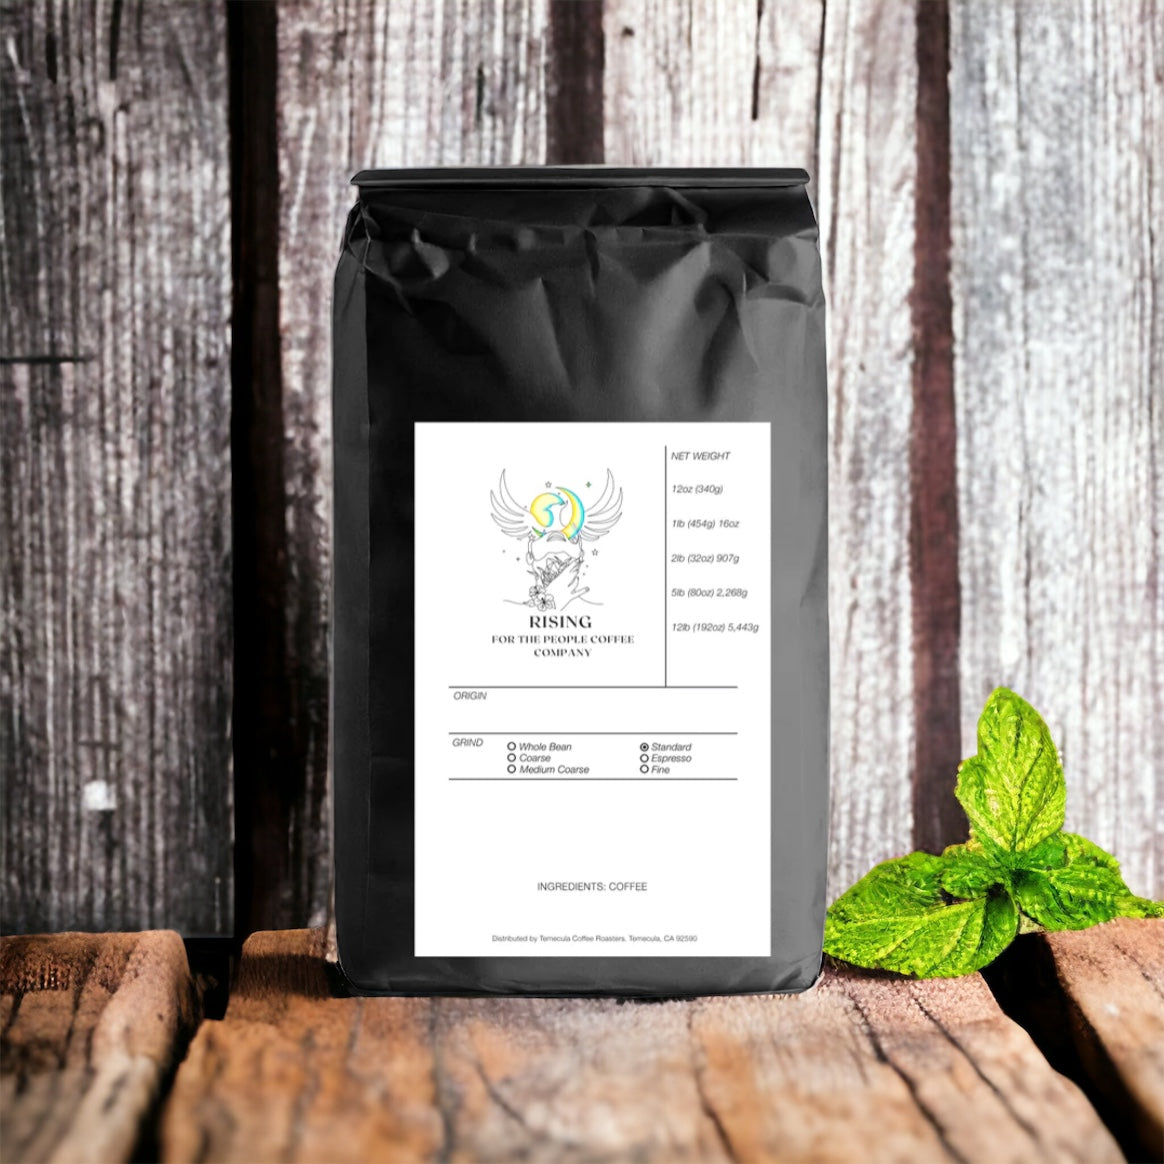 Rising for people coffee mint flavored